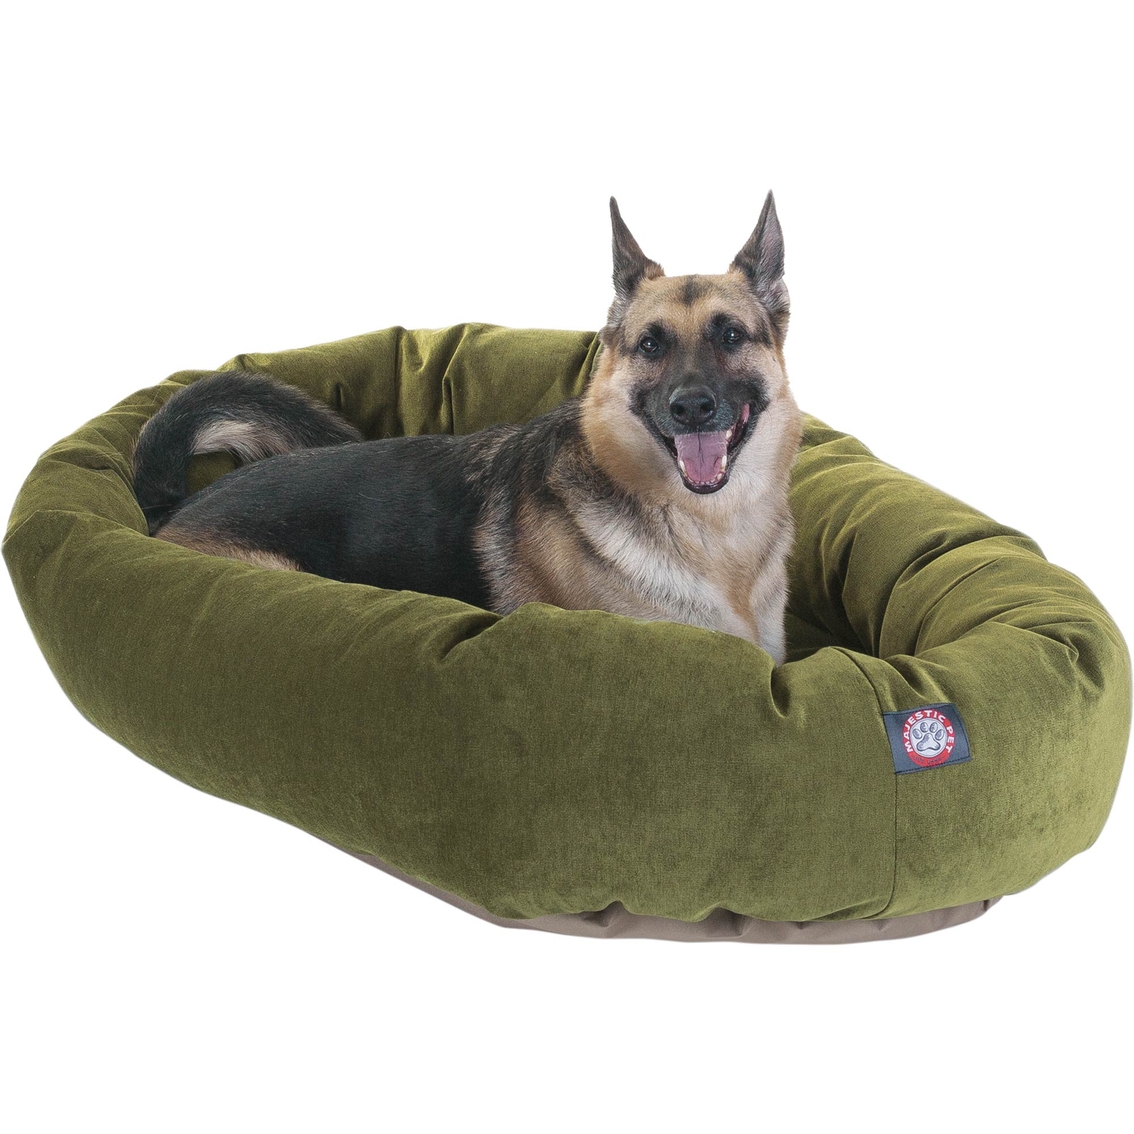 Majestic Pet Villa Collection Micro Velvet Bagel Bed By Majestic Pet - Image 3 of 4